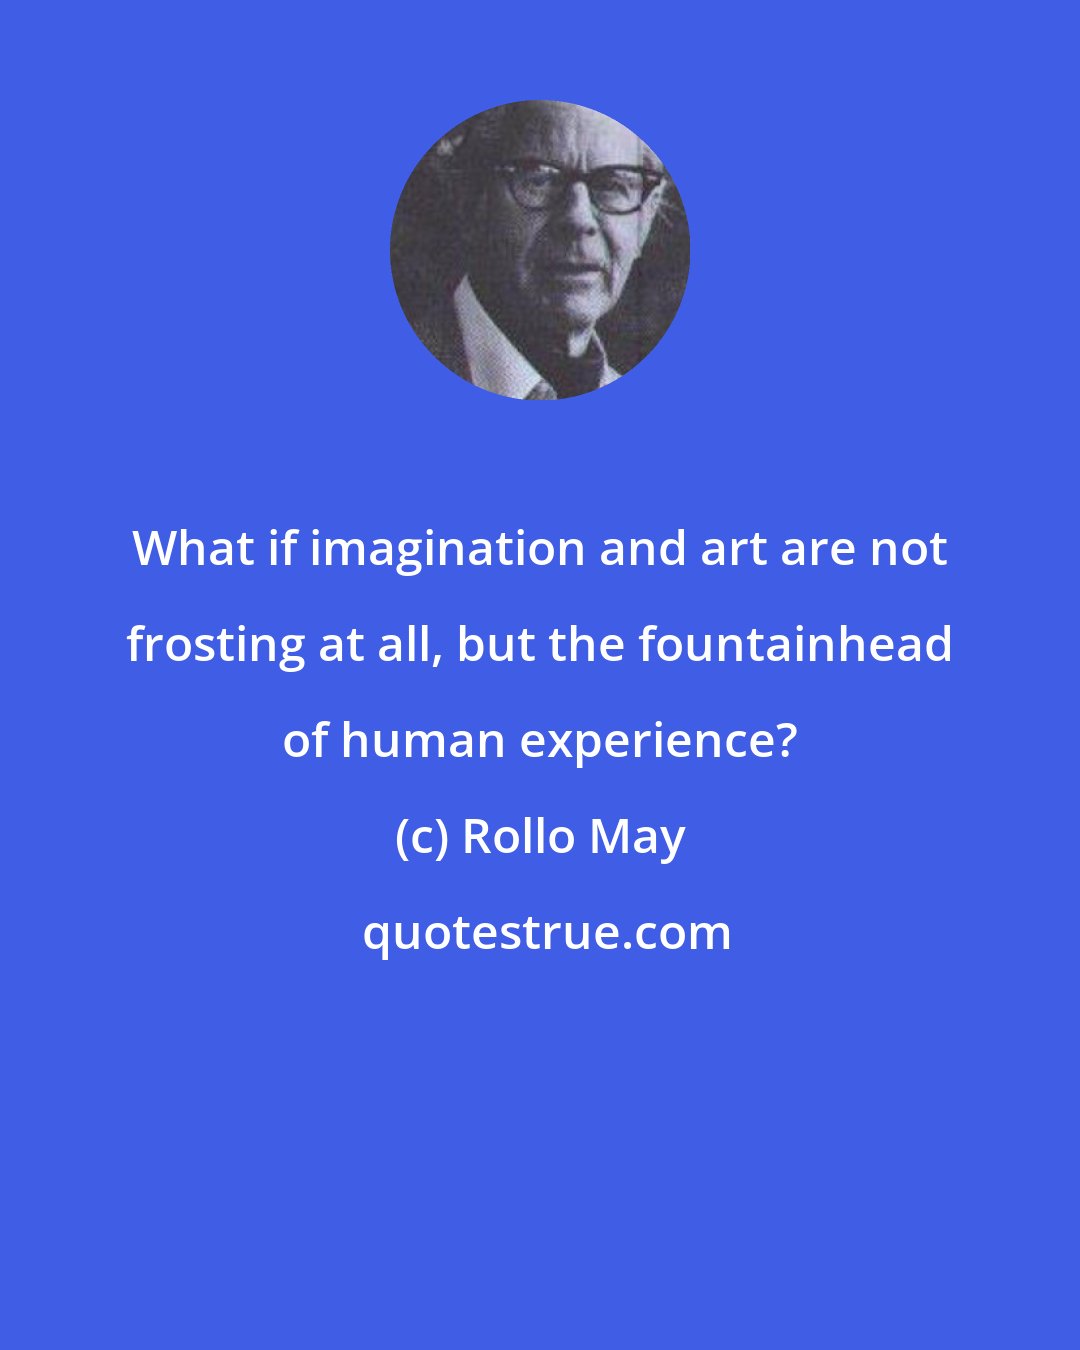 Rollo May: What if imagination and art are not frosting at all, but the fountainhead of human experience?